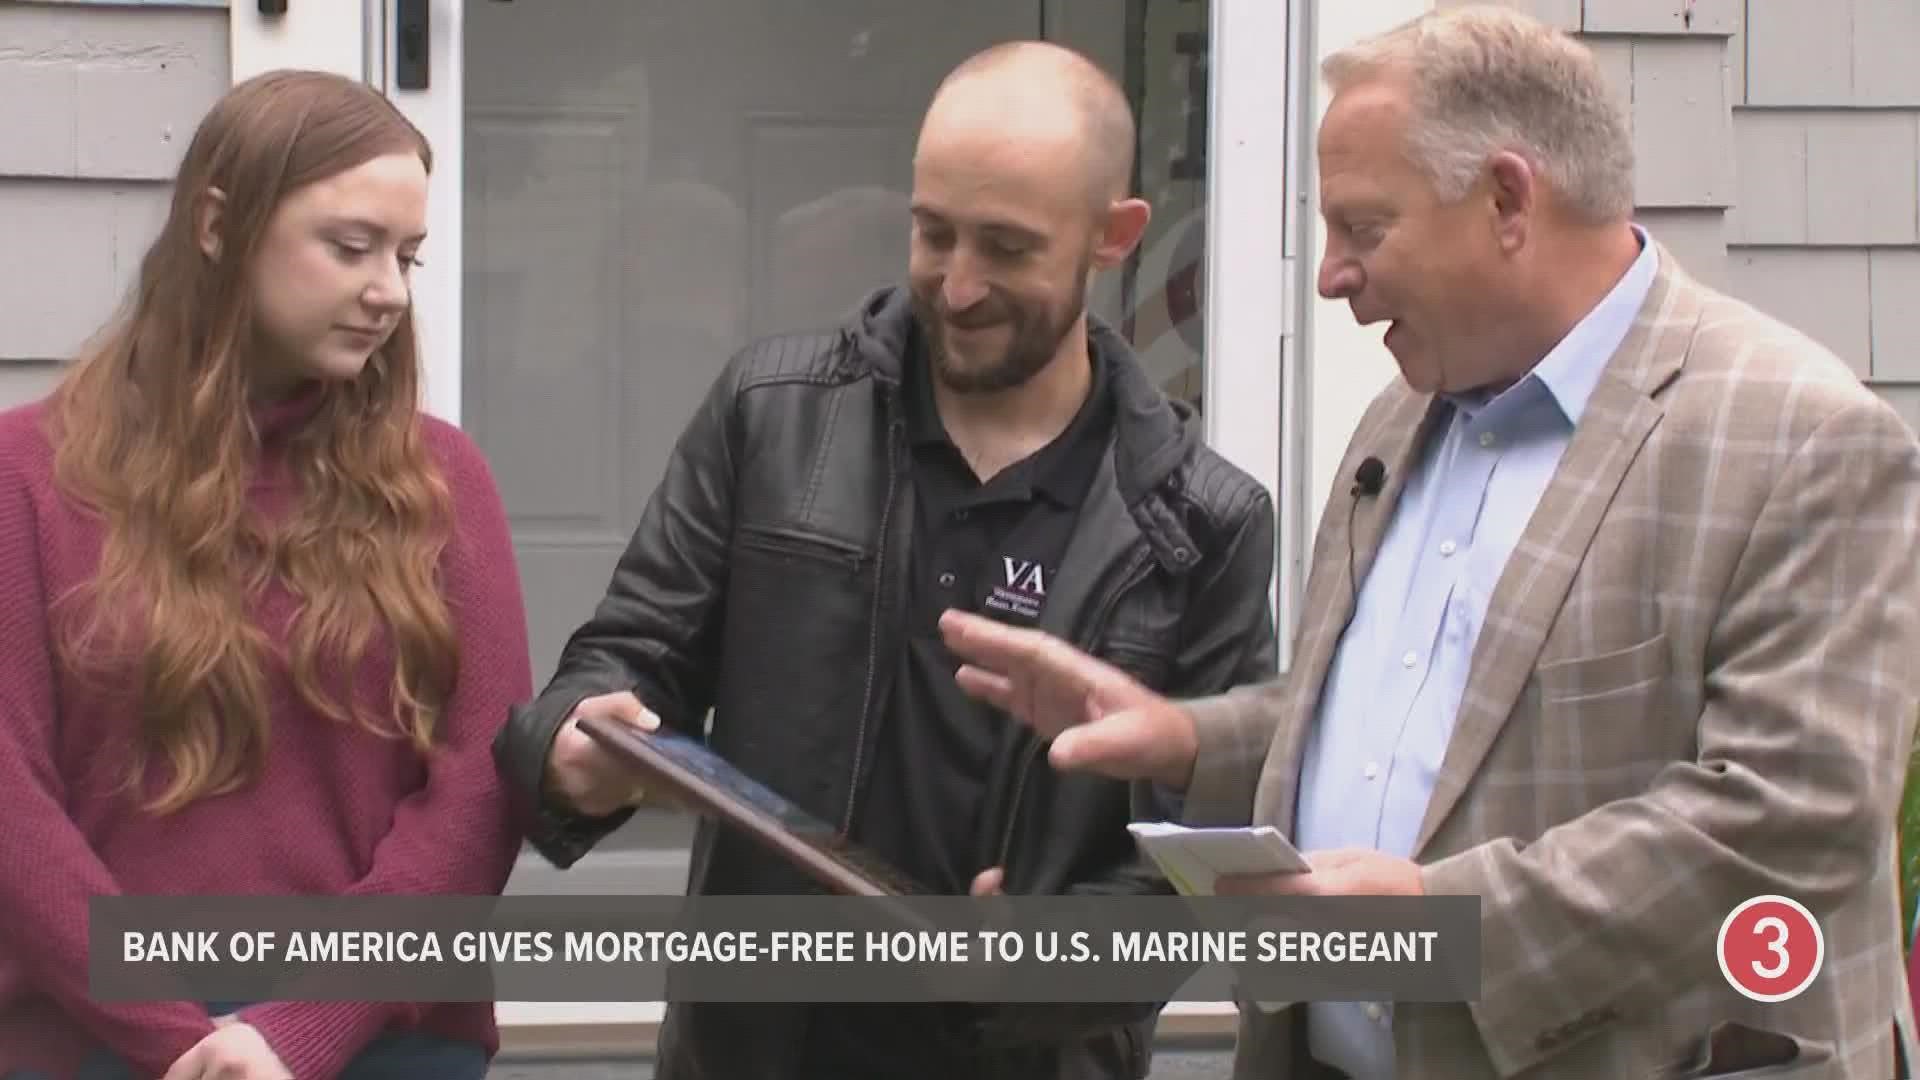 Bank of America presented the keys to a mortgage-free home to U.S. Marine Sergeant Anthony Leanza.